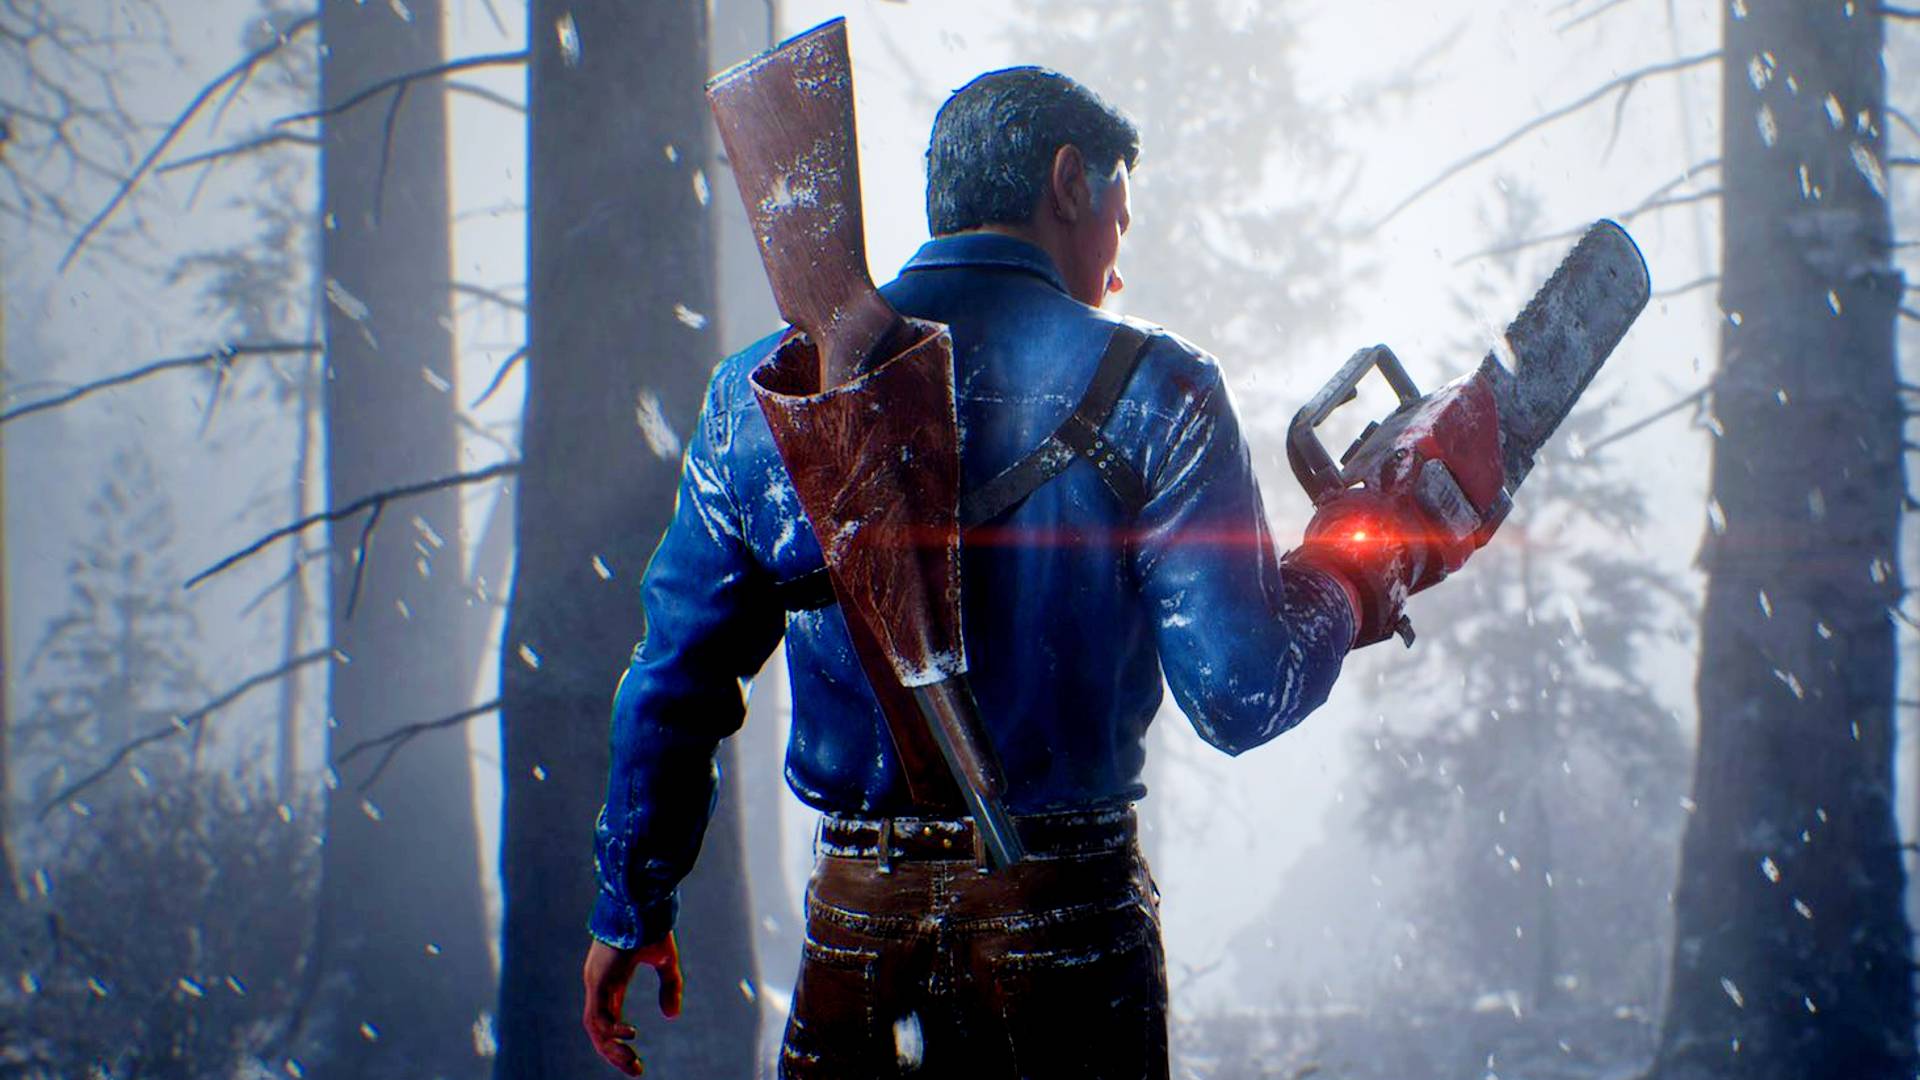 Evil Dead The Game release date, gameplay, and more | The Loadout